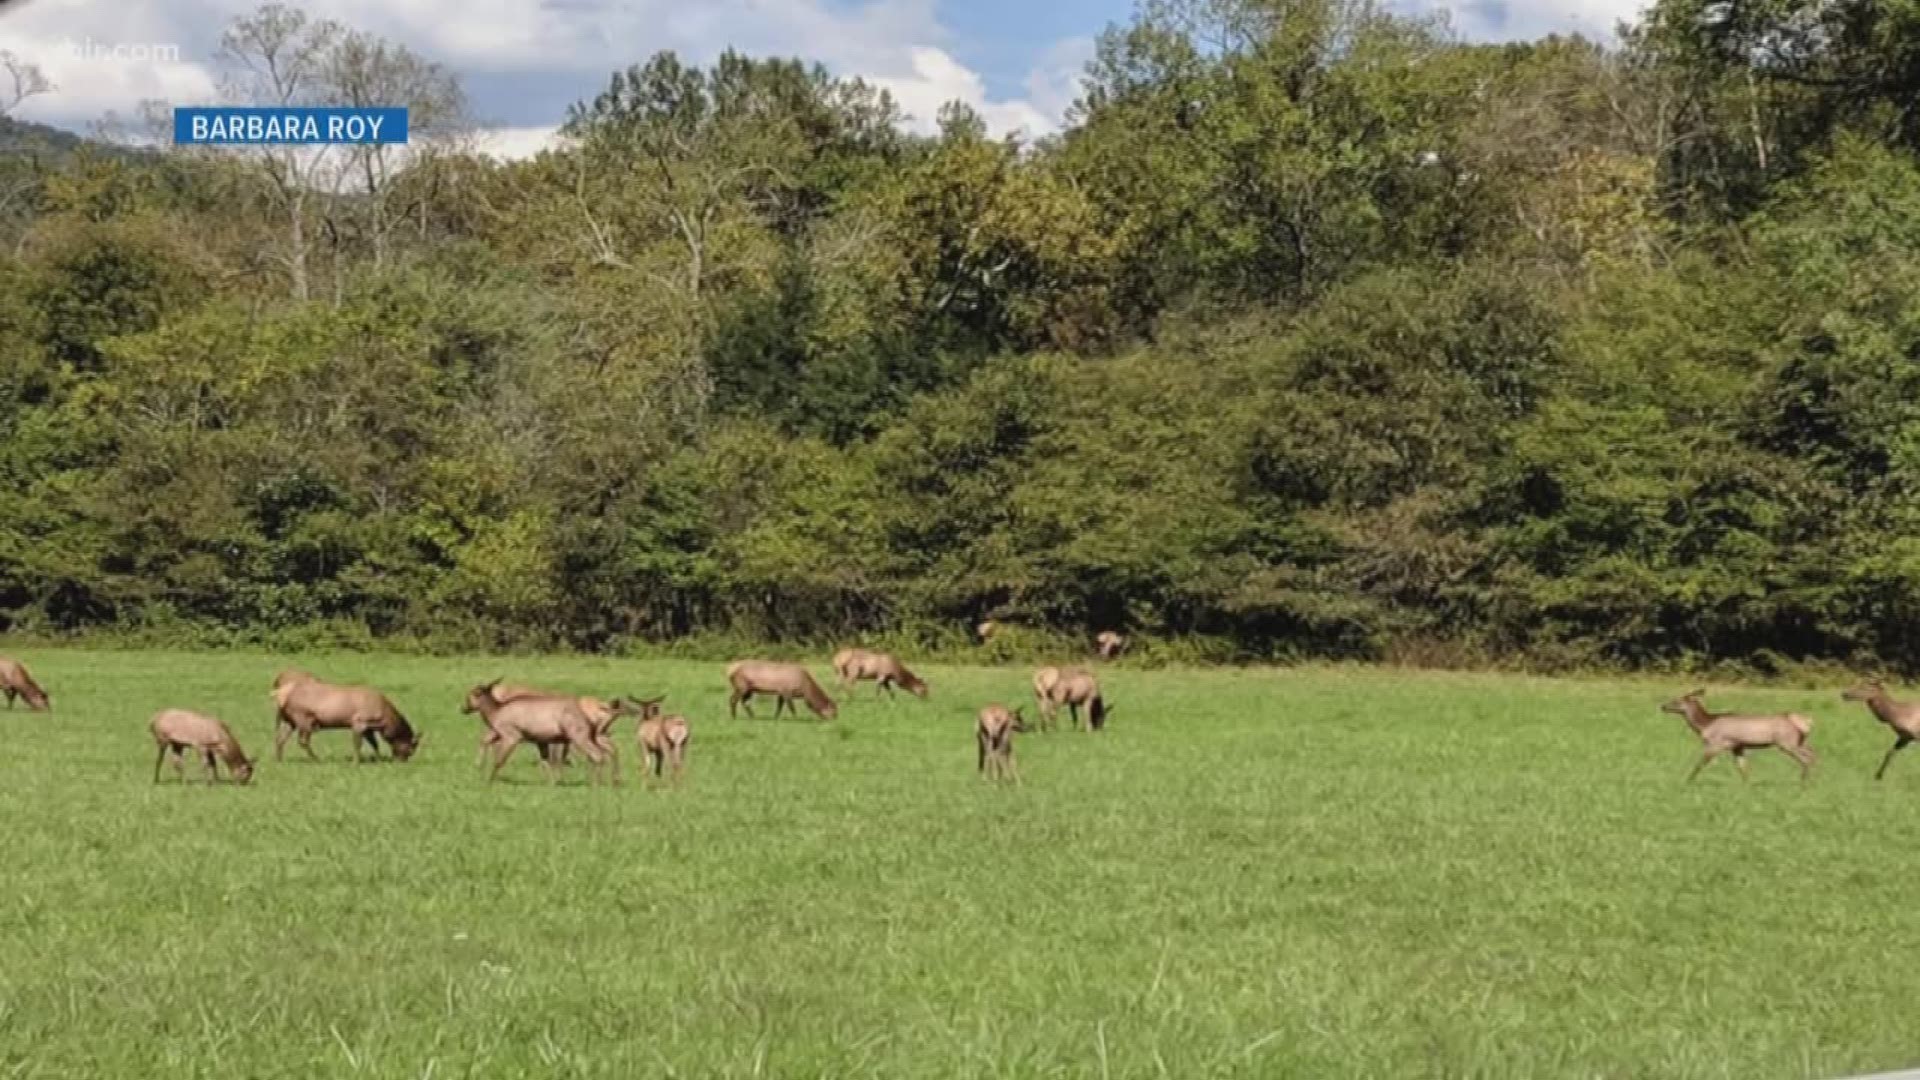 The sounds of Elk are echoing through the Smokies.